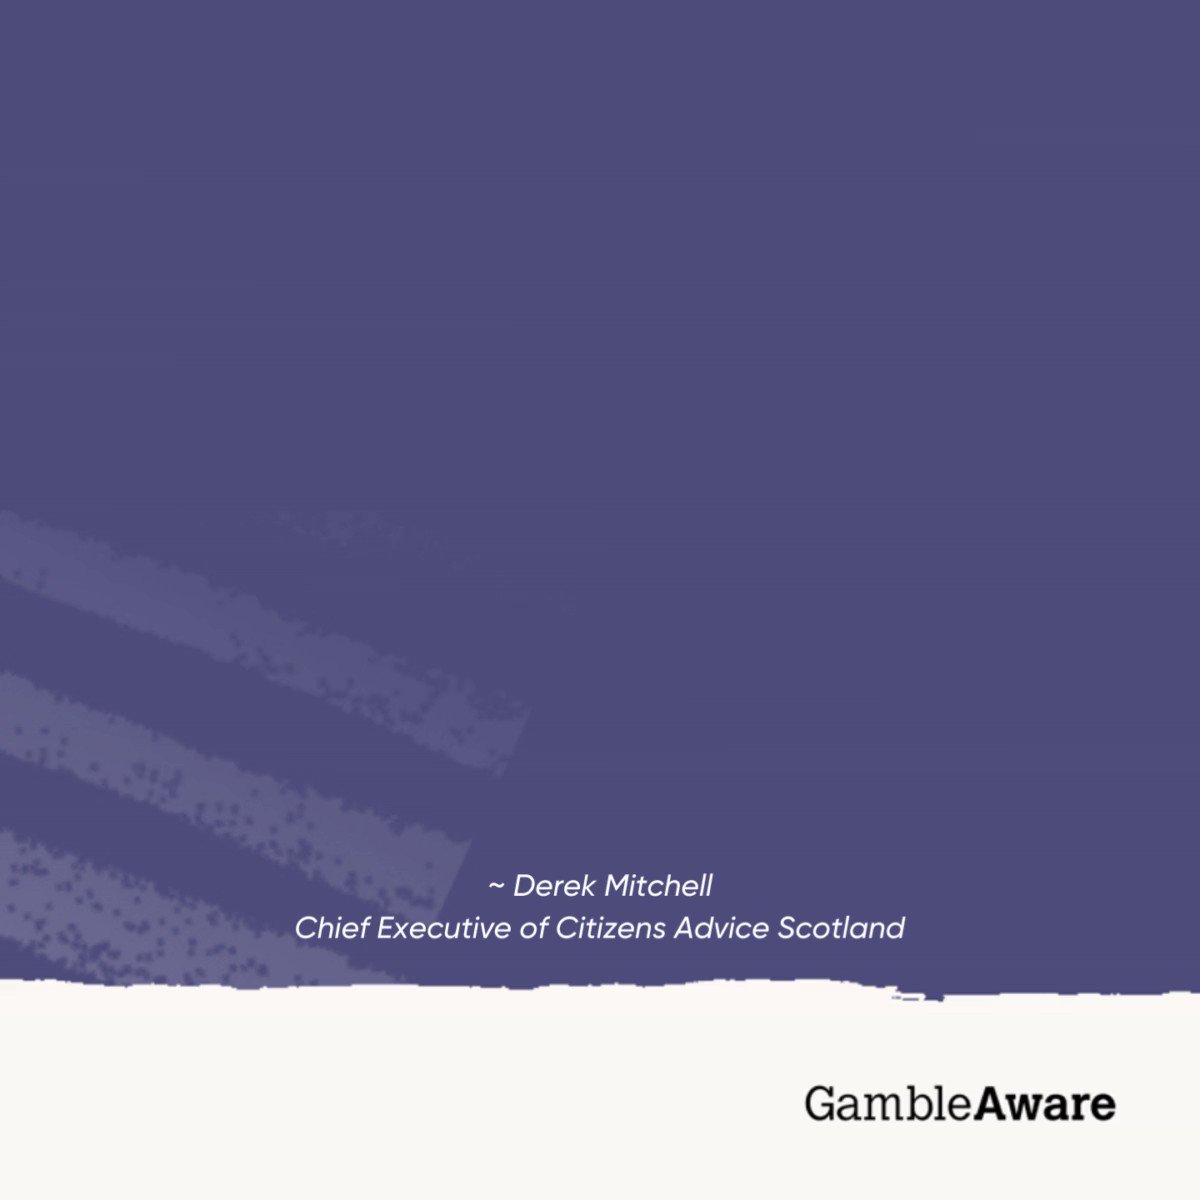 The Gambling Support Service (GSS), delivered by  (CAS), in partnership with GambleAware, evidences stigma as a personal and social barrier to seeking support.

For more information on the service, read the full article here